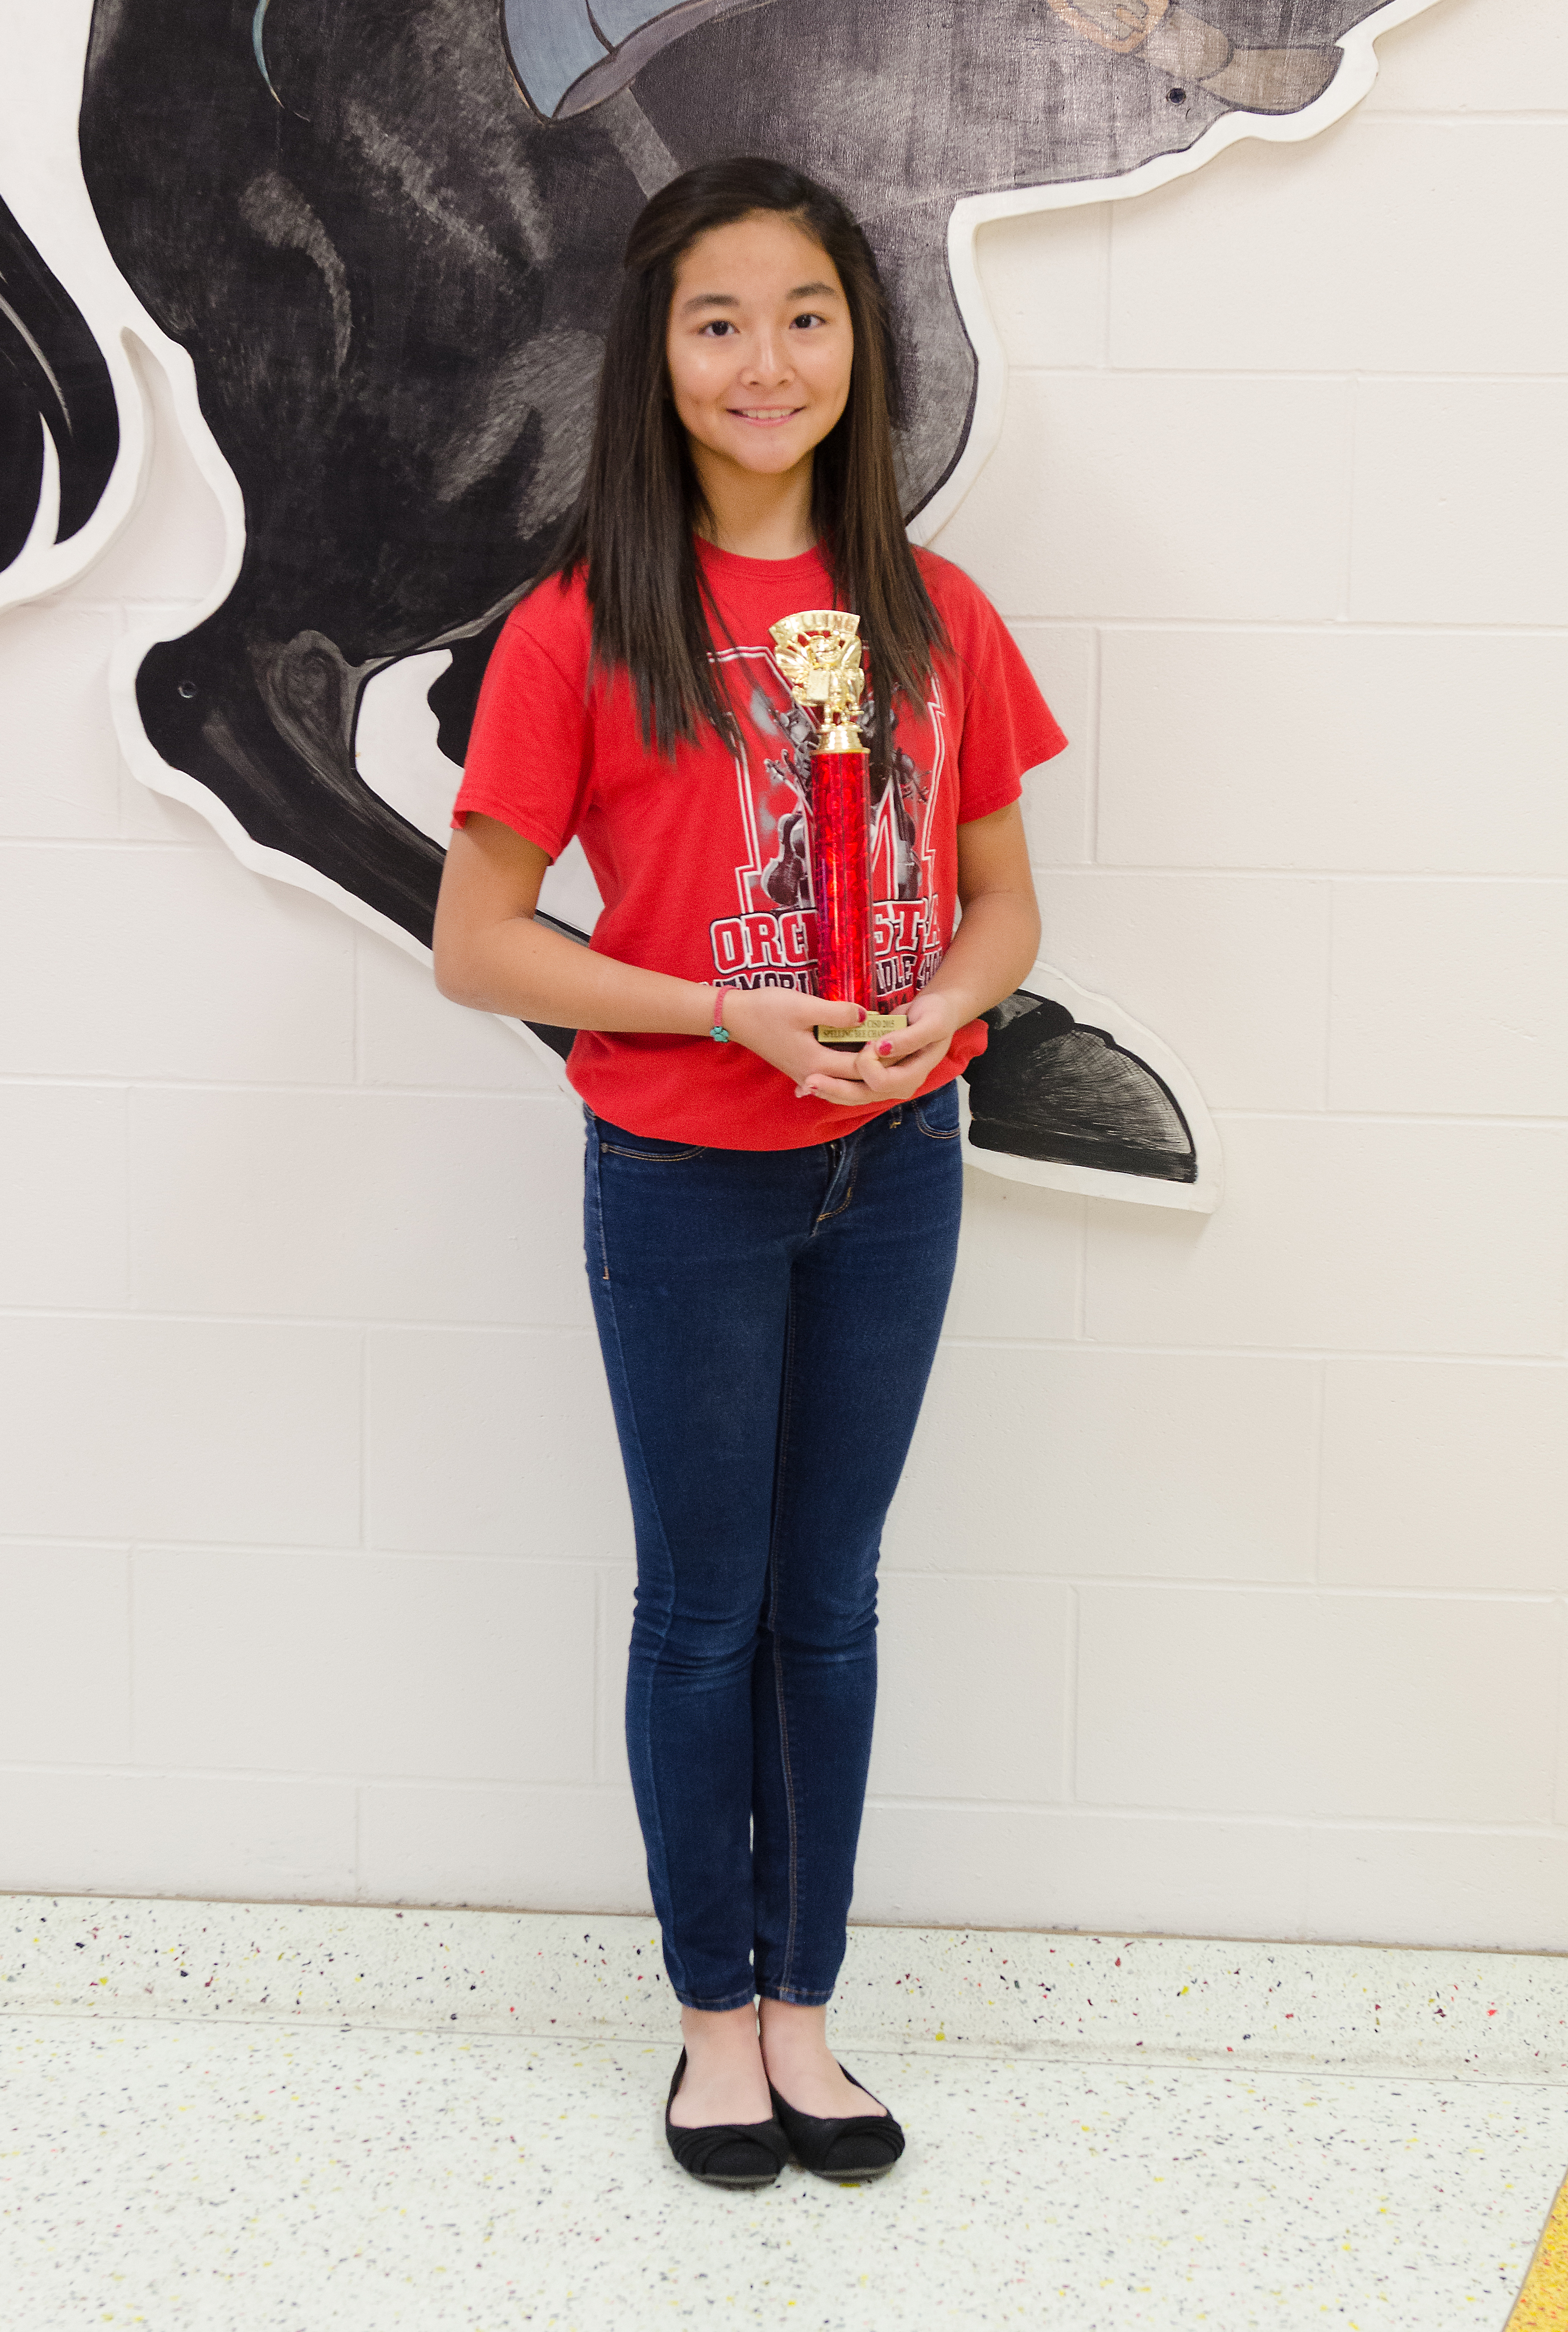 Memorial MS student takes district championship at the 2015 District Spelling Bee